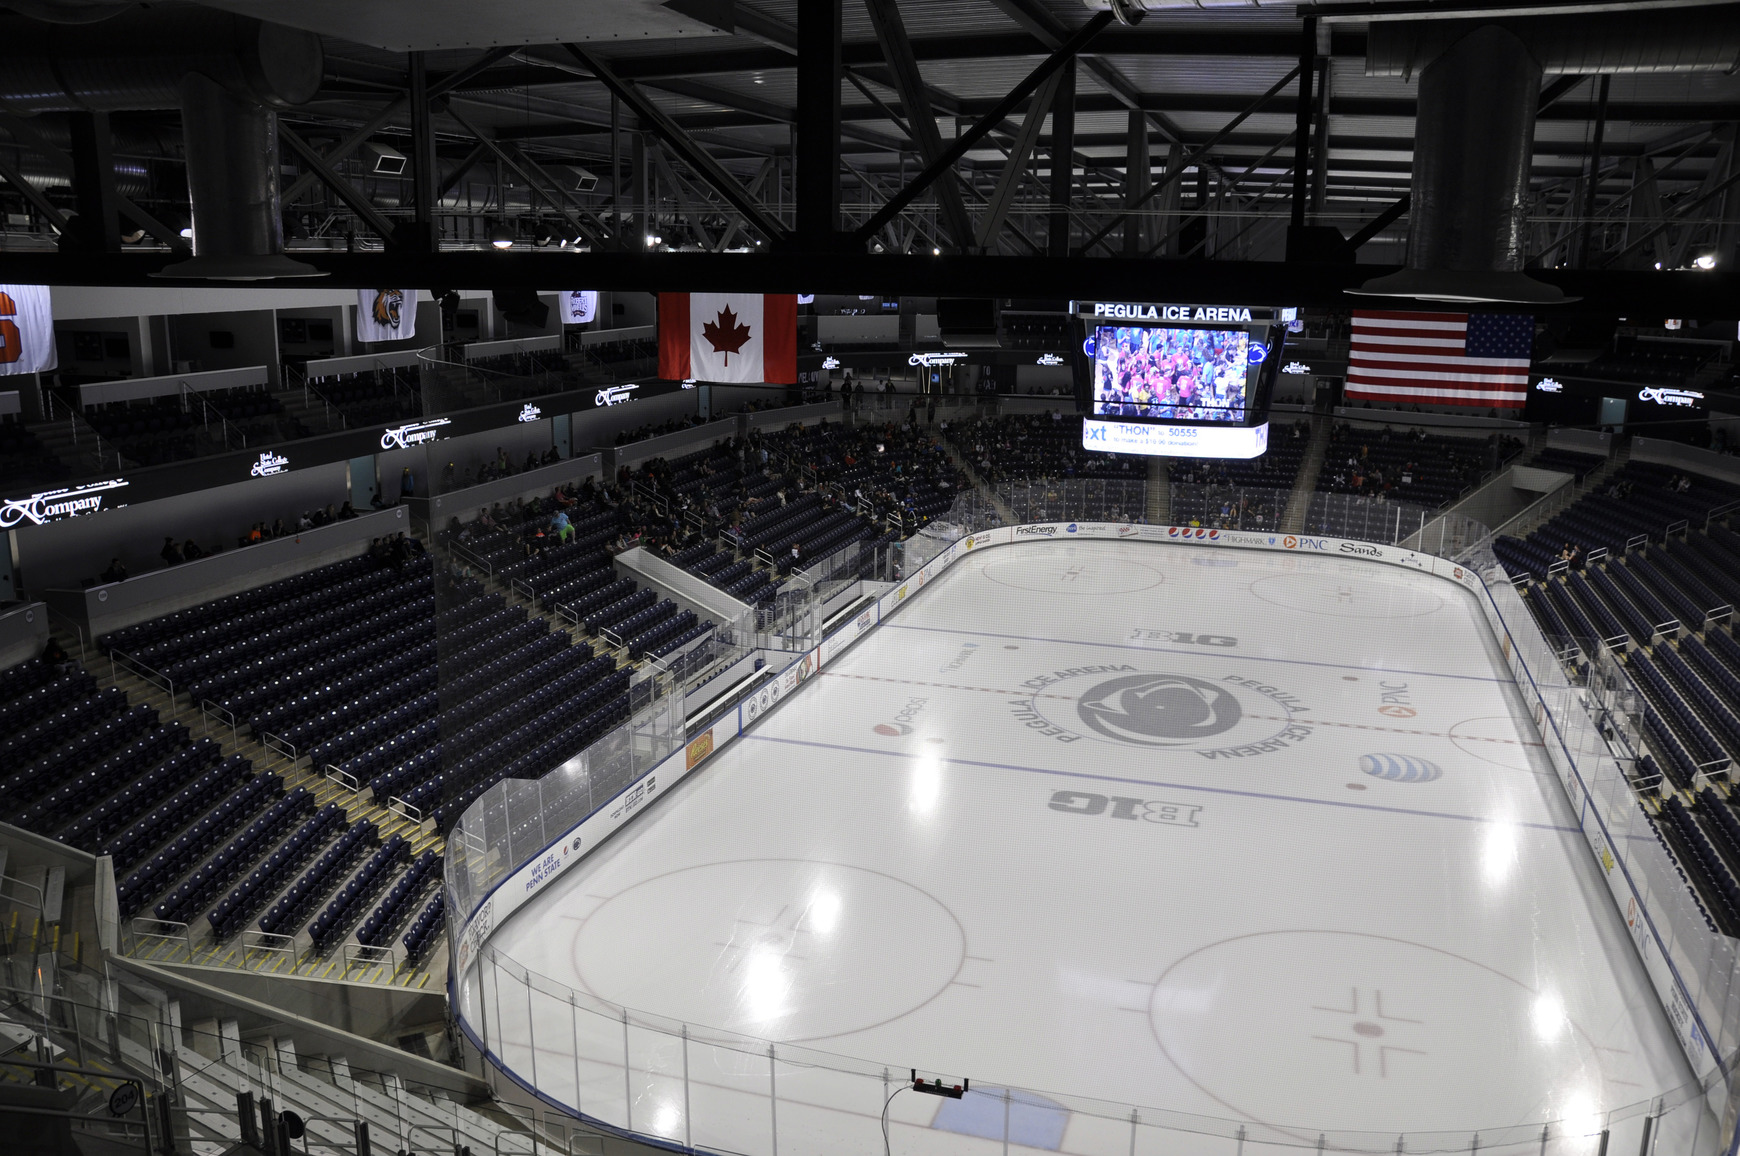 Scenes of Anticipation from Pegula Ice Arena